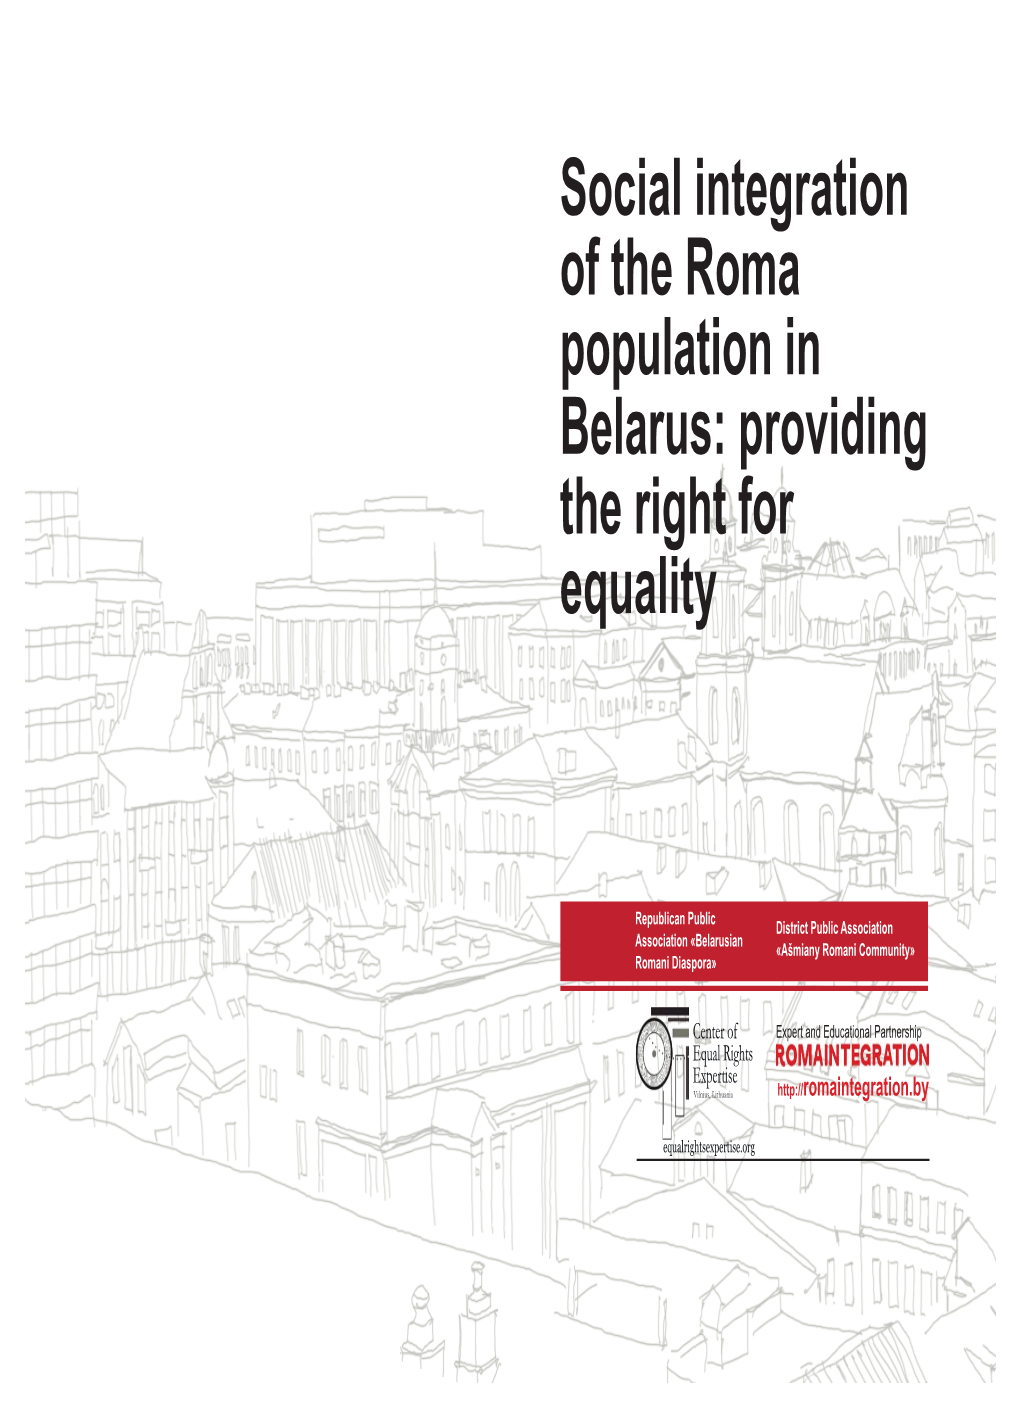 Social Integration of the Roma Population in Belarus: Providing the Right for Equality